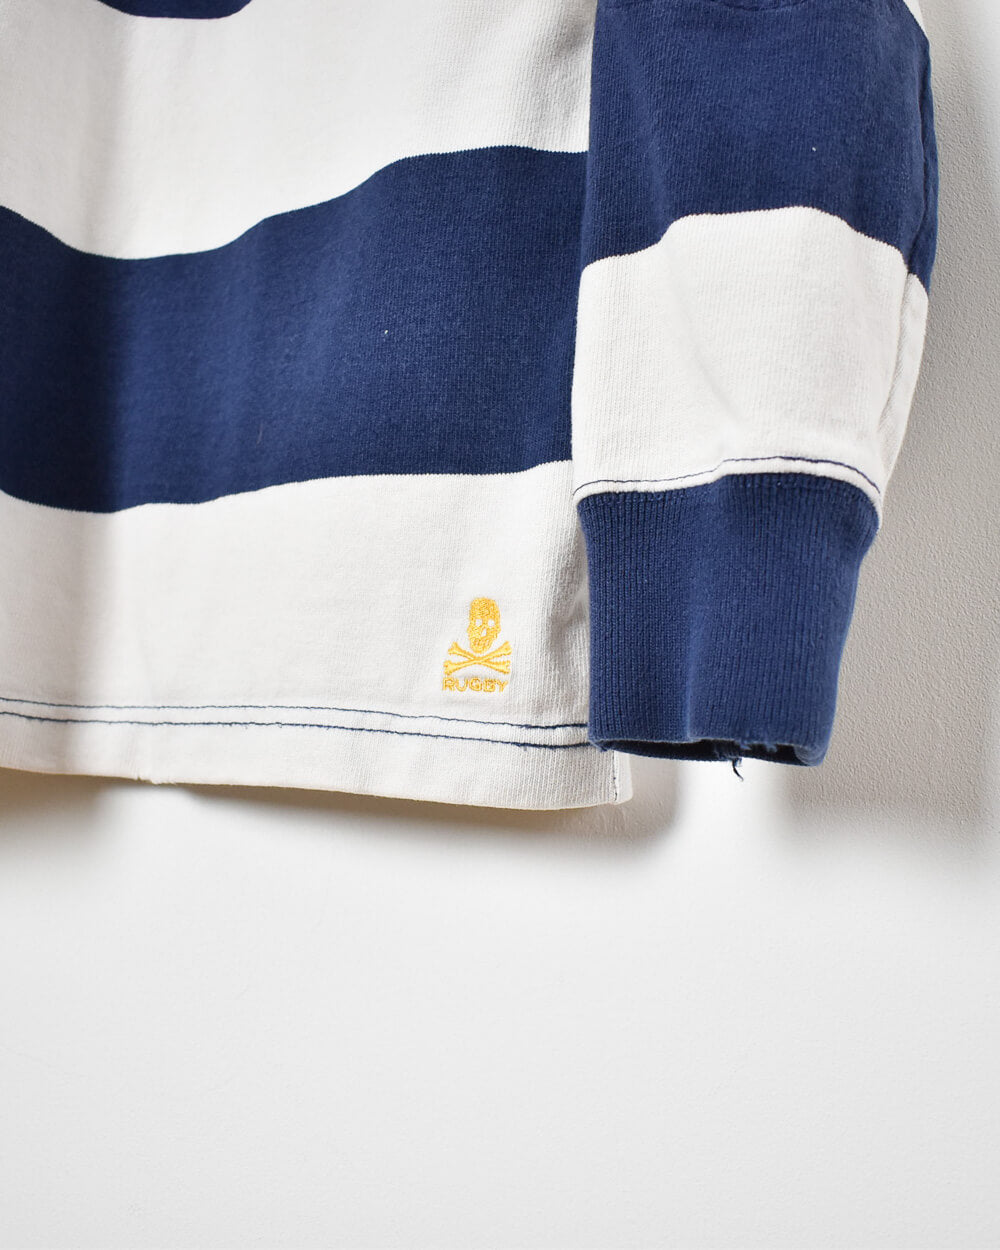 Vintage Rugby Shirt - Small - Domno Vintage 90s, 80s, 00s Retro and Vintage Clothing 